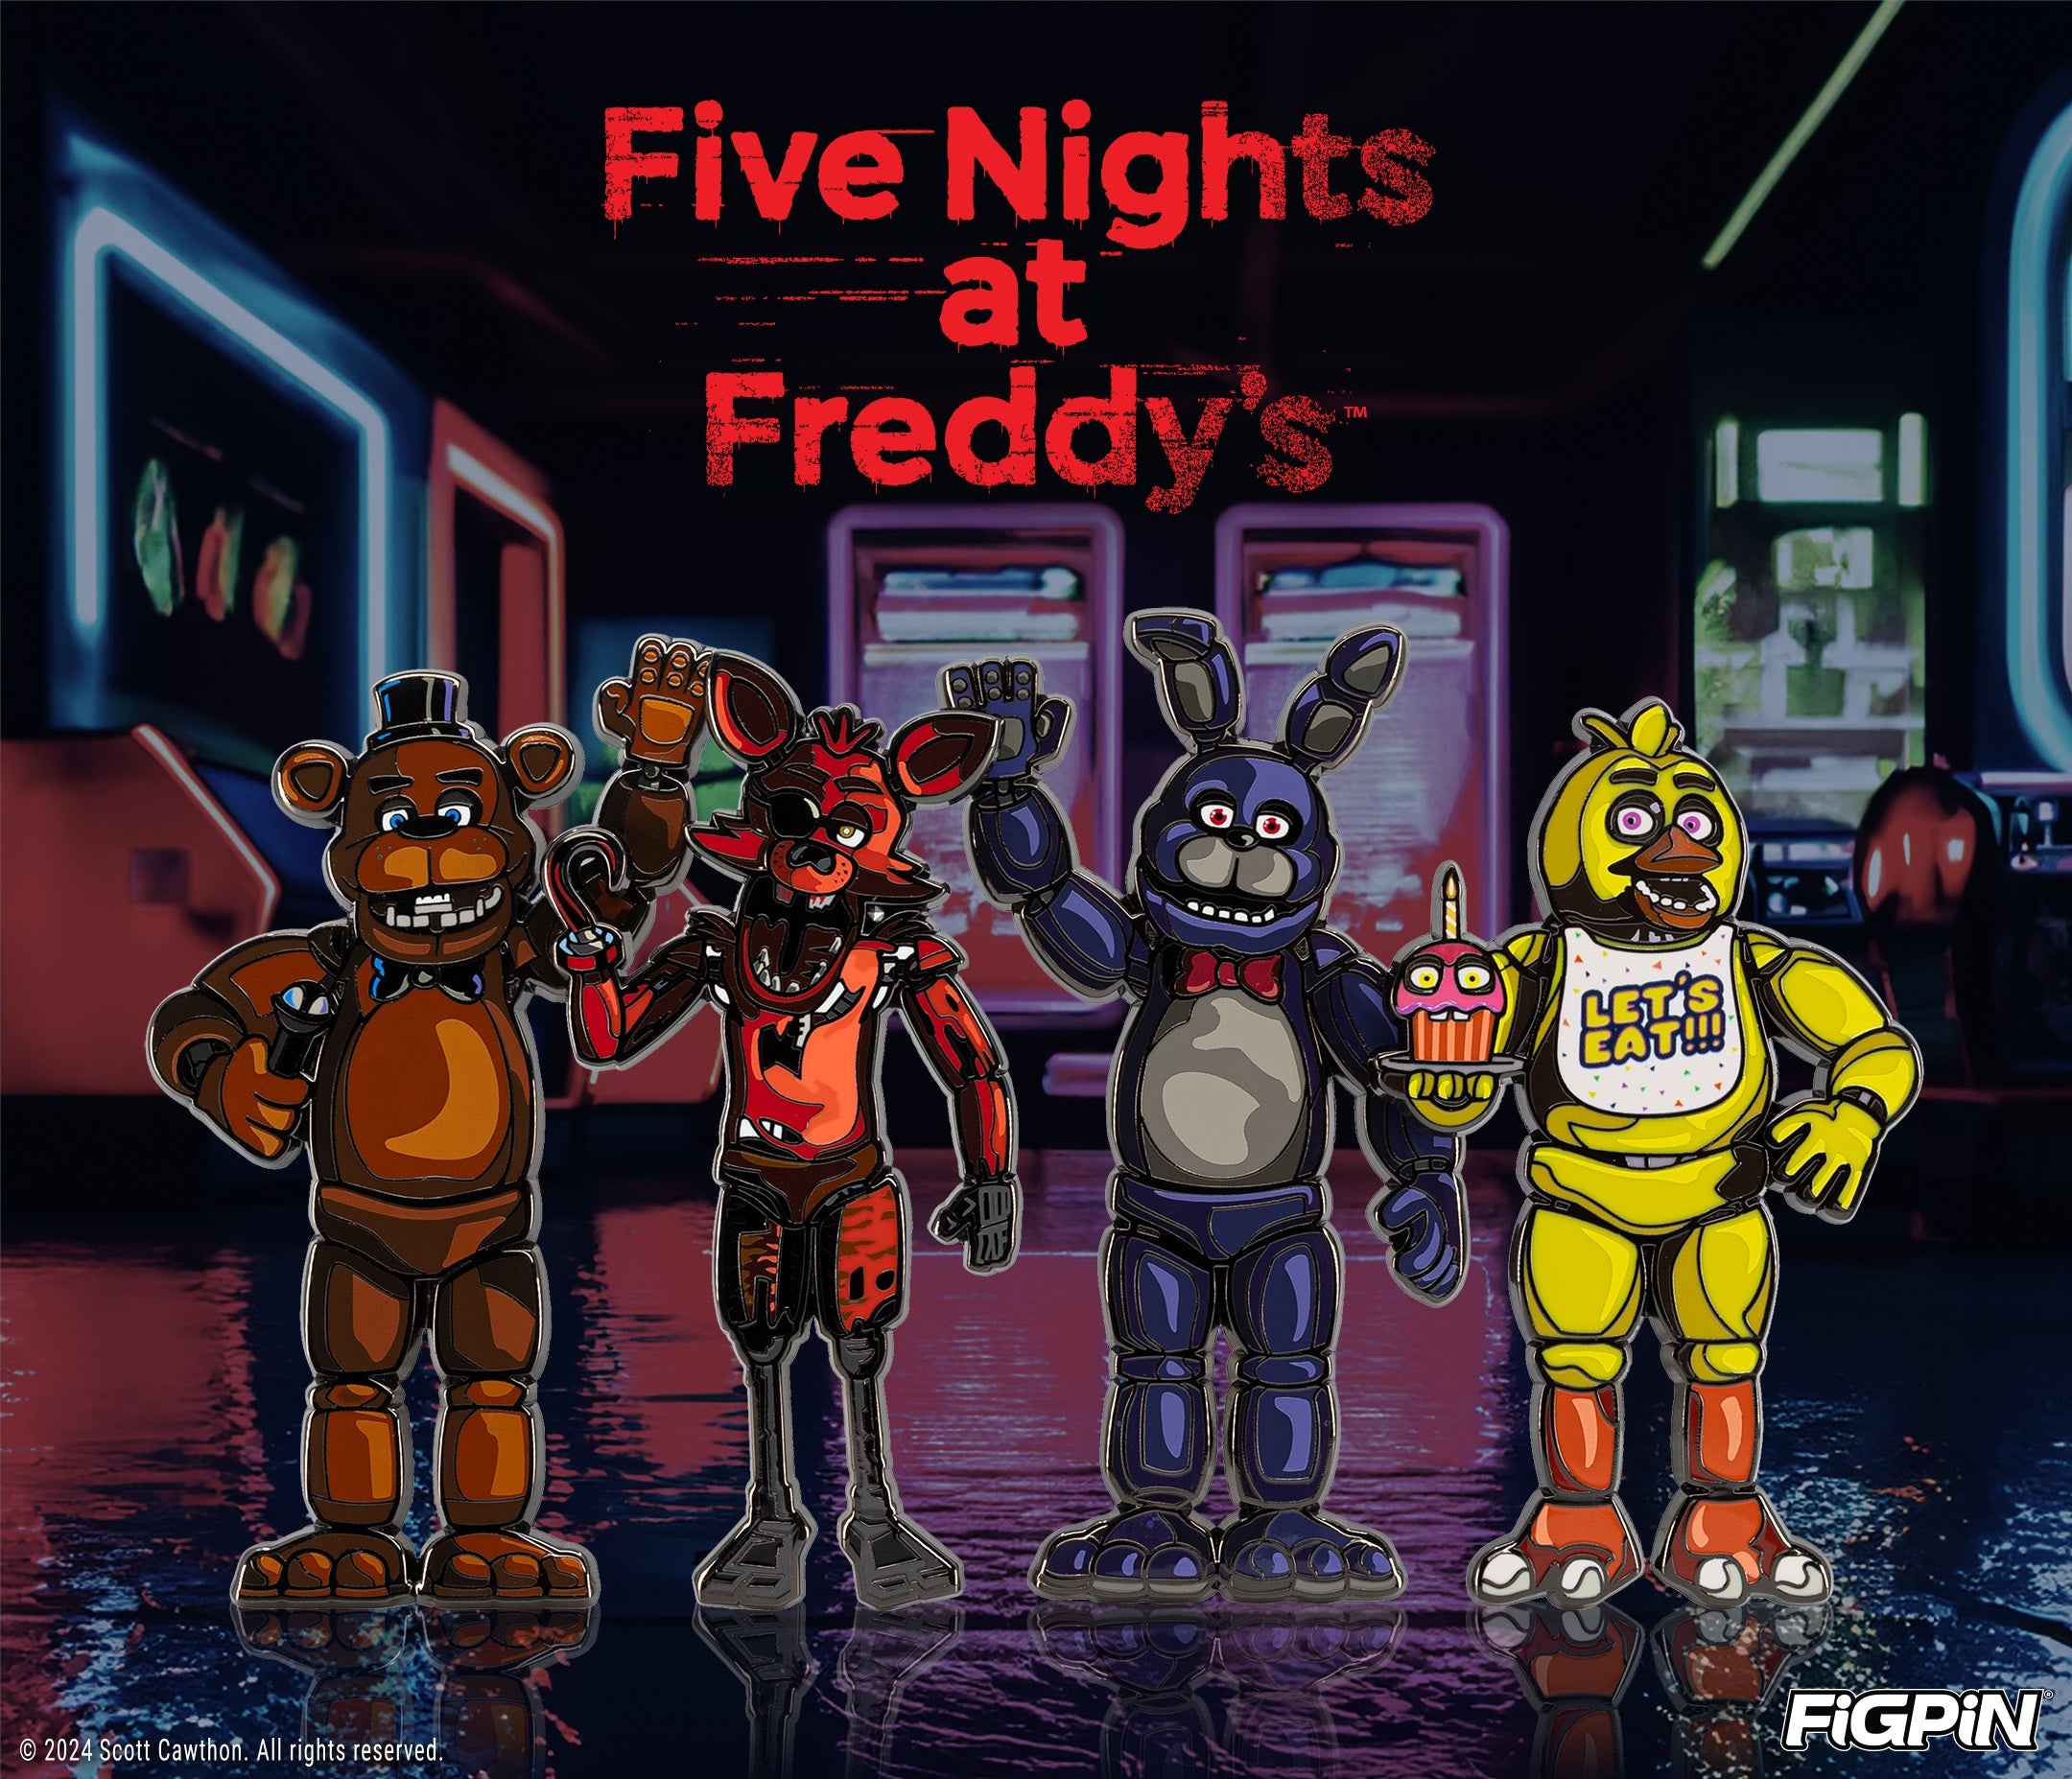 Photograph of Five Nights at Freddy's characters available as enamel pins in this Five Nights at Freddy's FiGPiN wave release